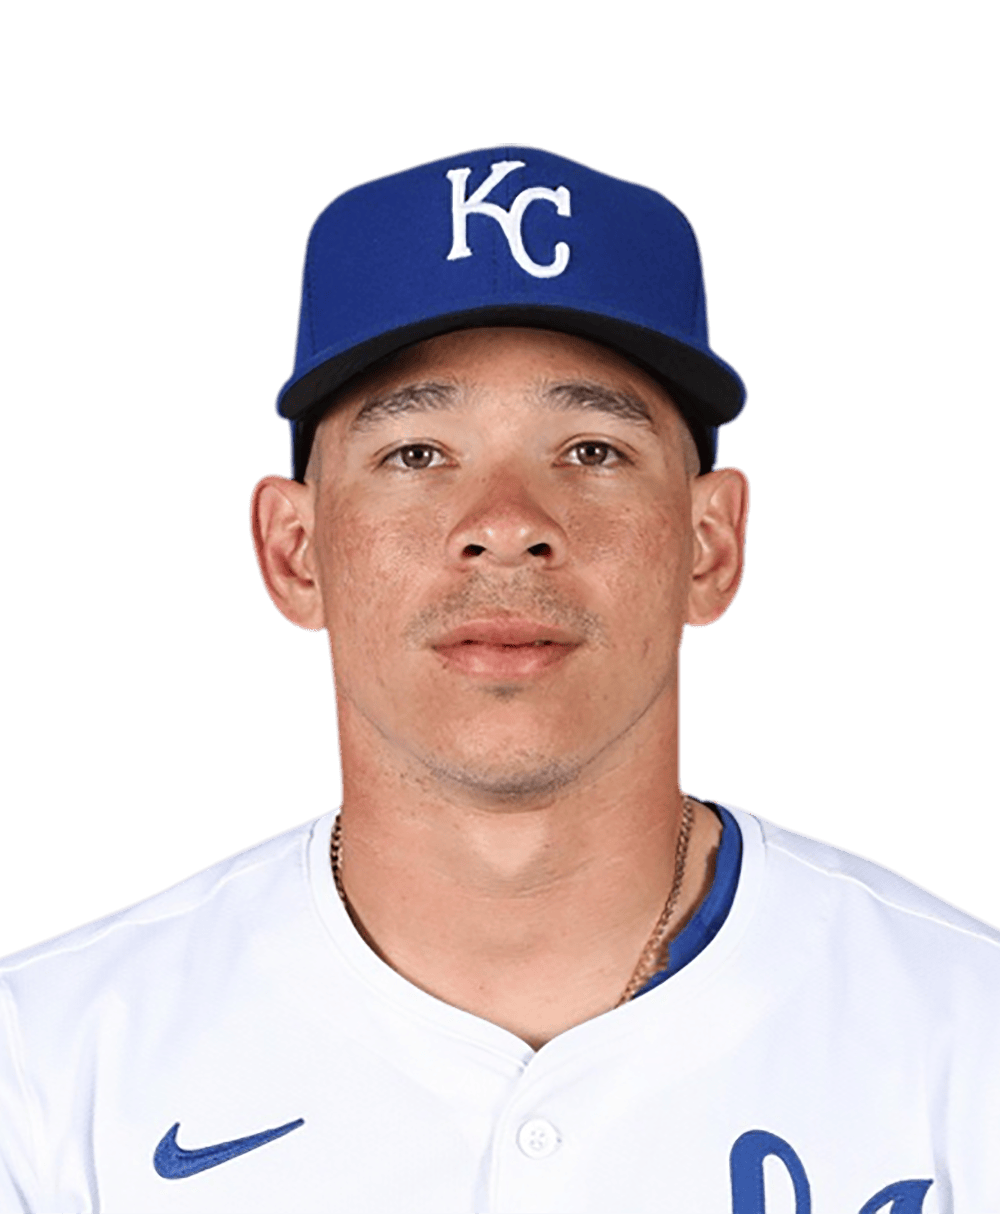 Fermin's bunt in ninth gives Royals 4-3 win vs. White Sox